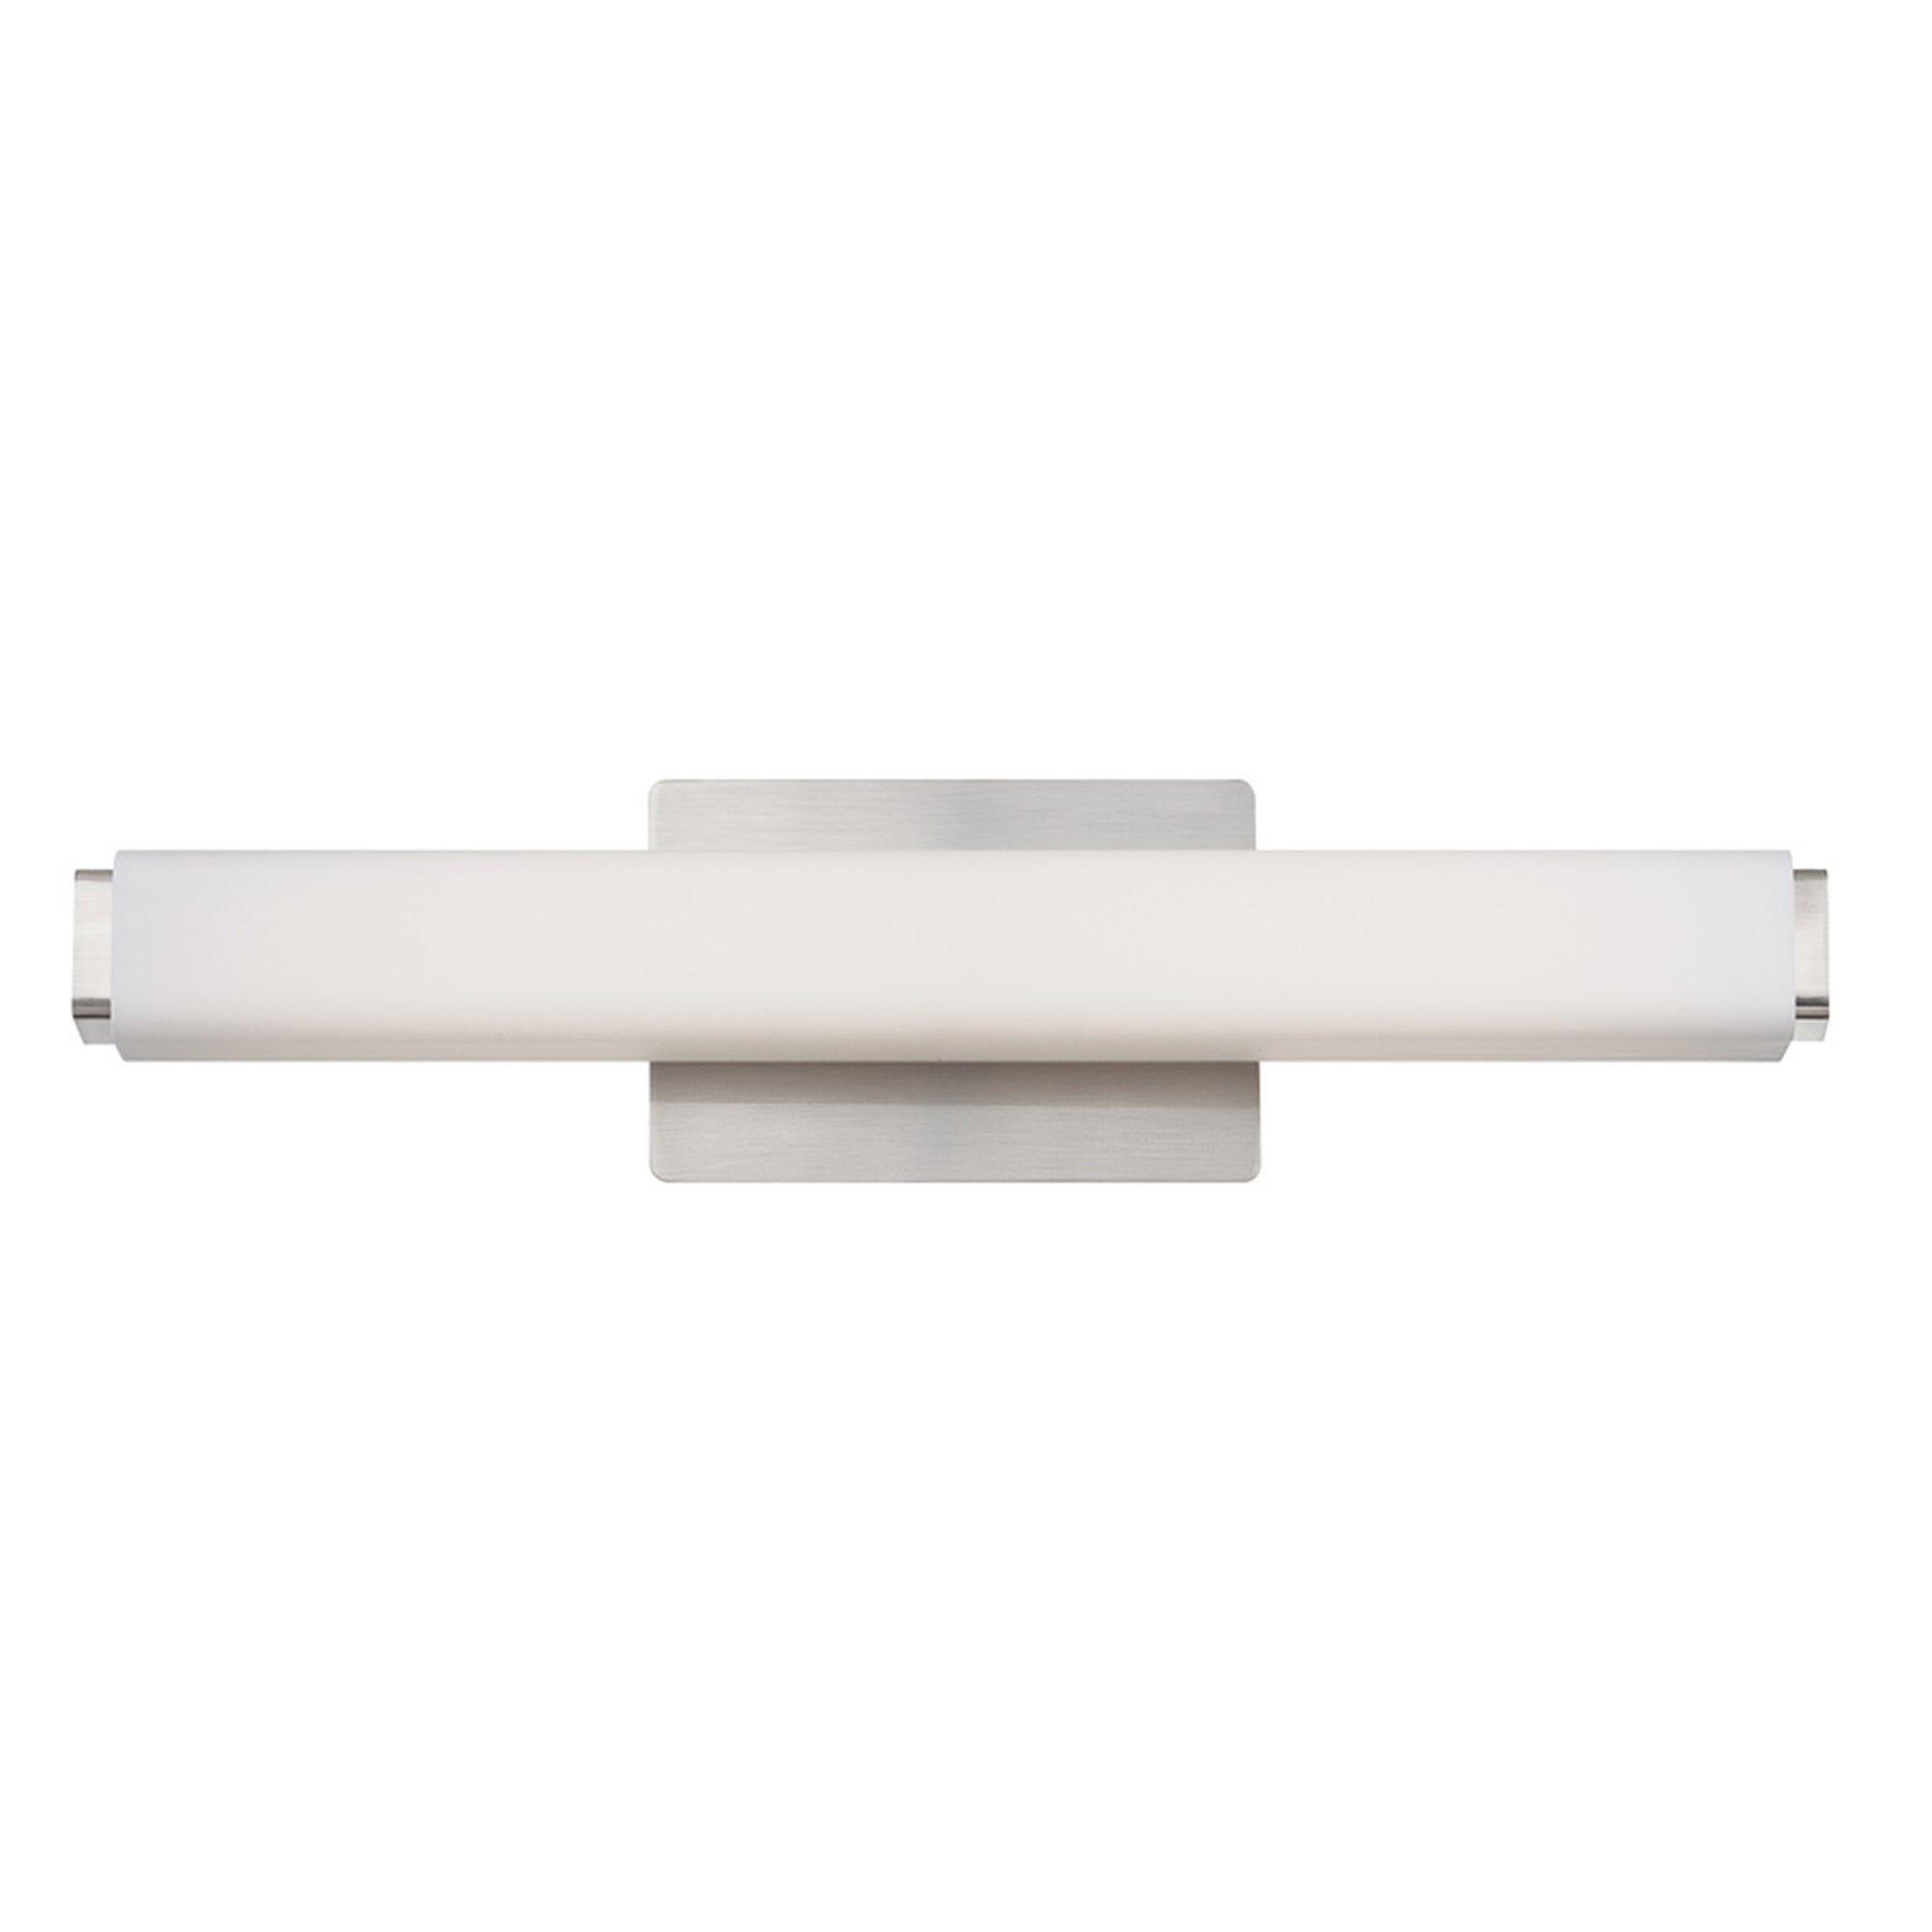 VOGUE Bathroom sconce Nickel INTEGRATED LED - WS-3120-27-BN | MODERN FORMS